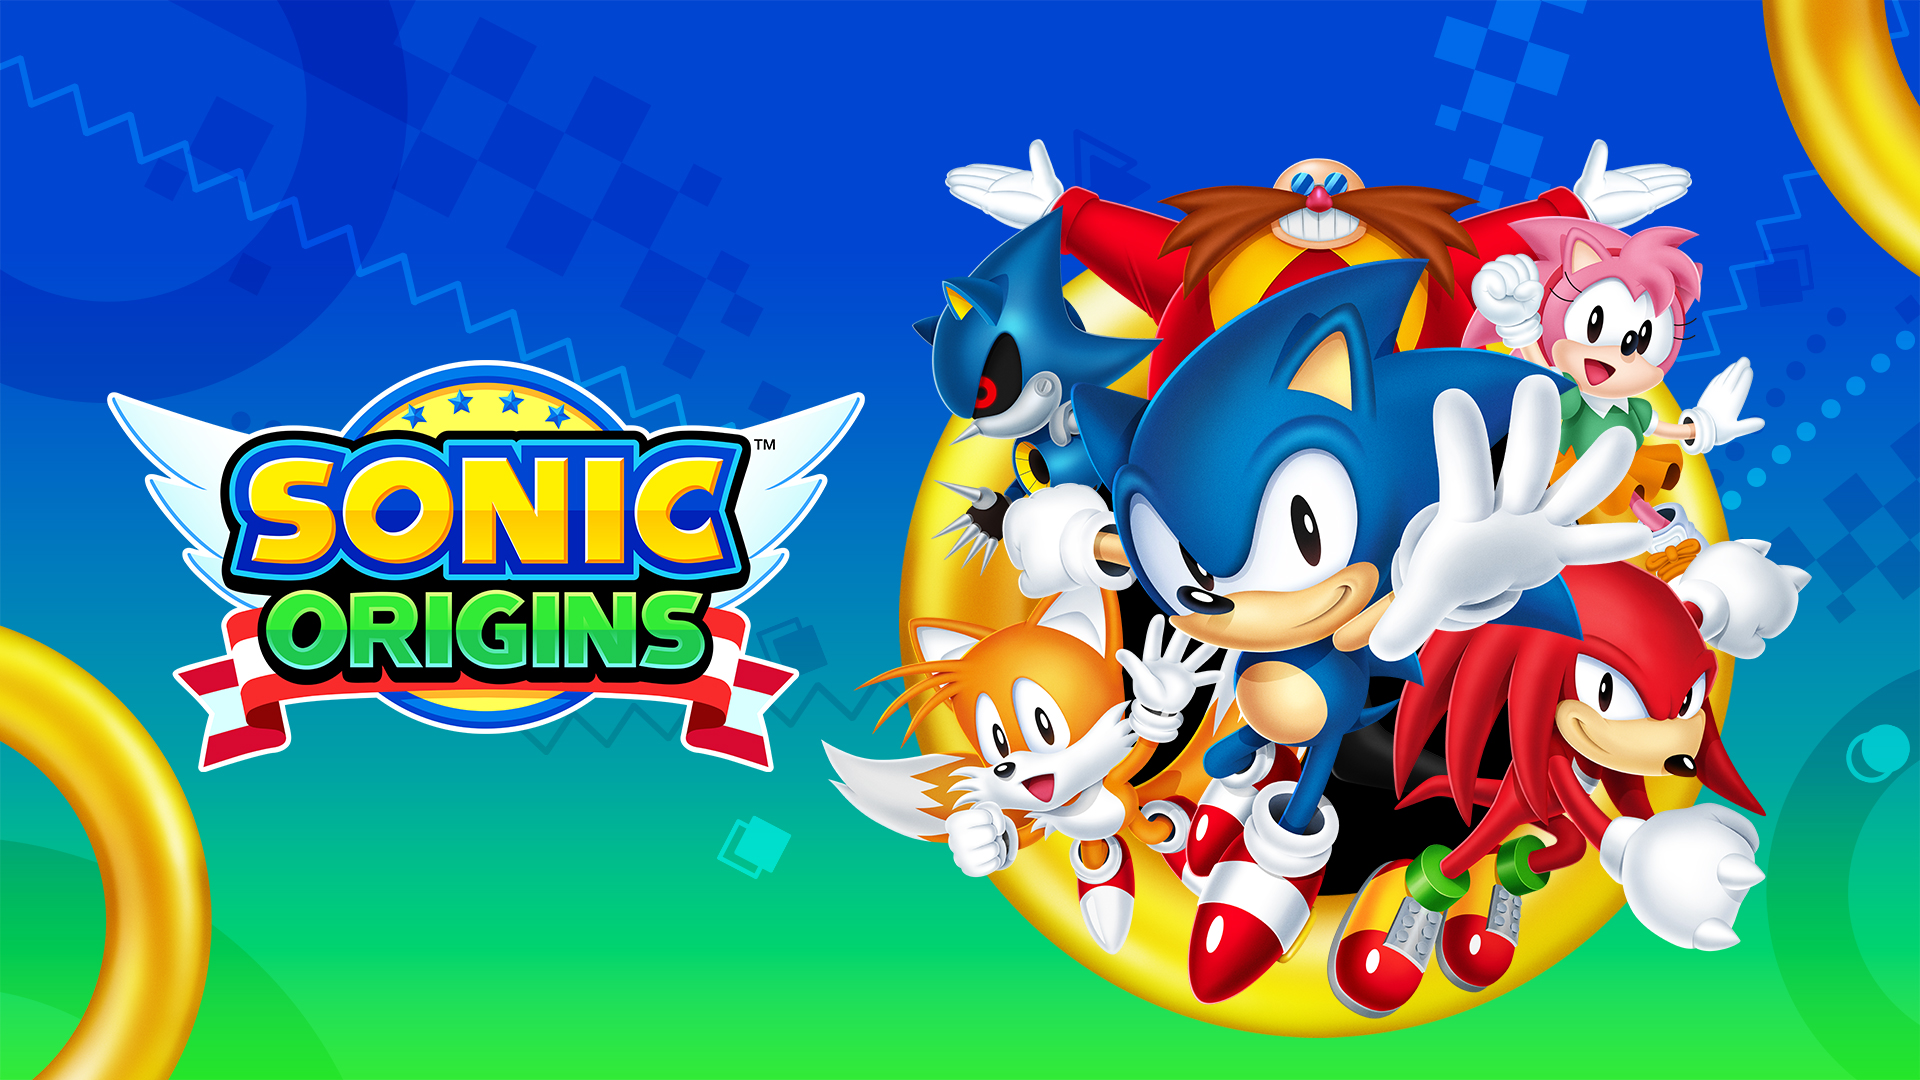 Some more news about the Sonic Superstars Digital Deluxe Content (from the  Xbox Store) : r/SonicTheHedgehog